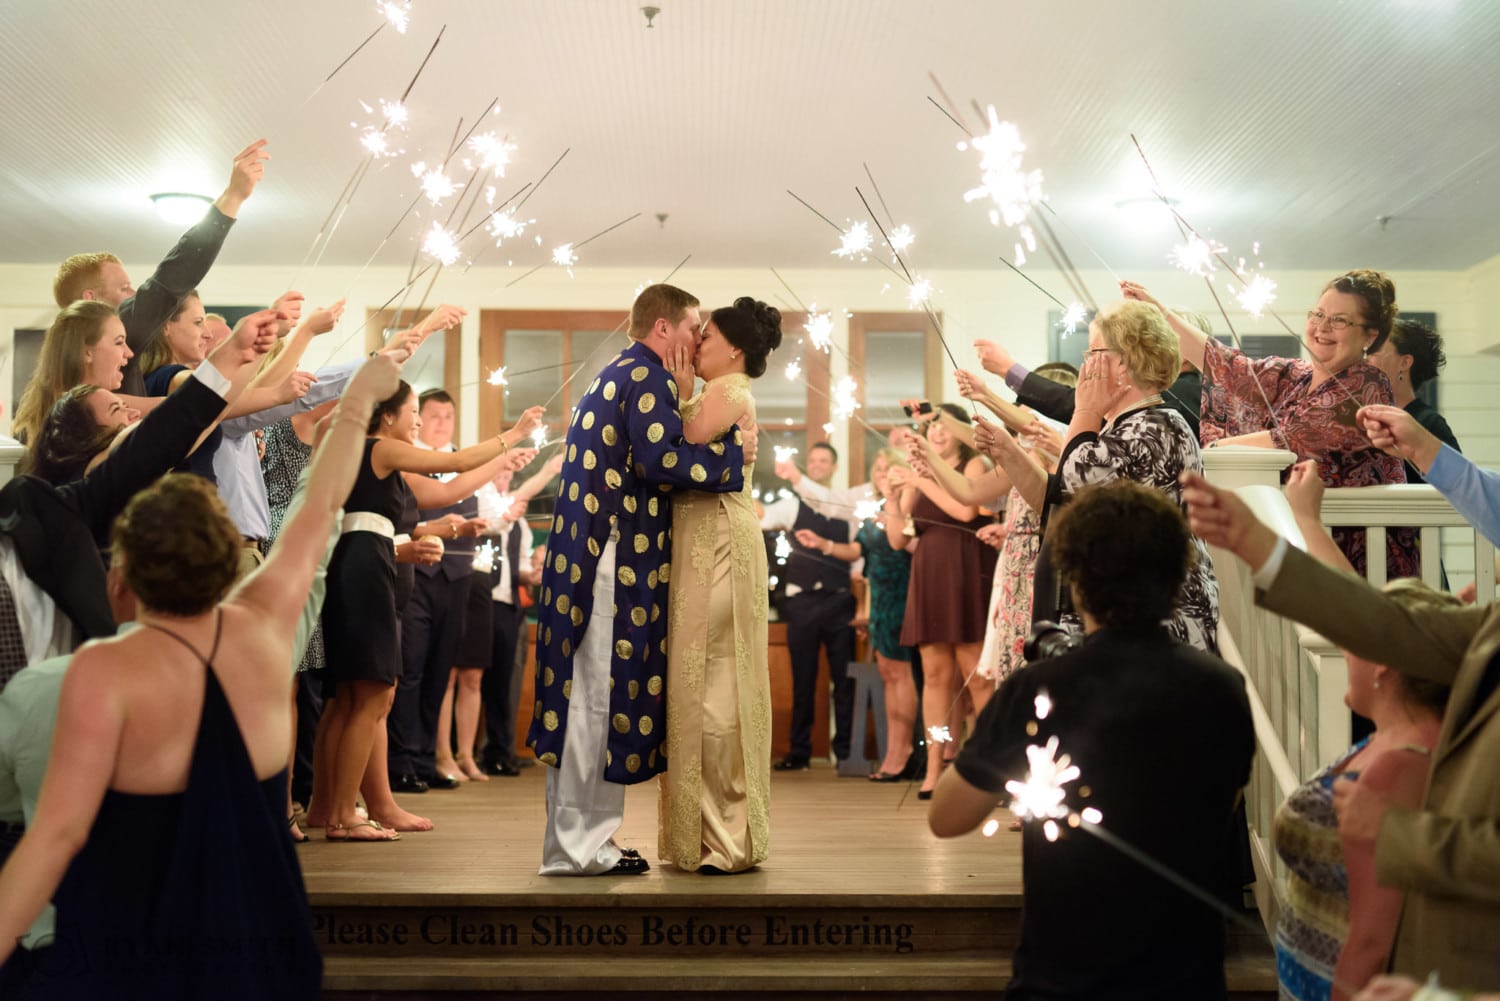 Great pictures of the sparkler exit - Dye Club at Barefoot Resort